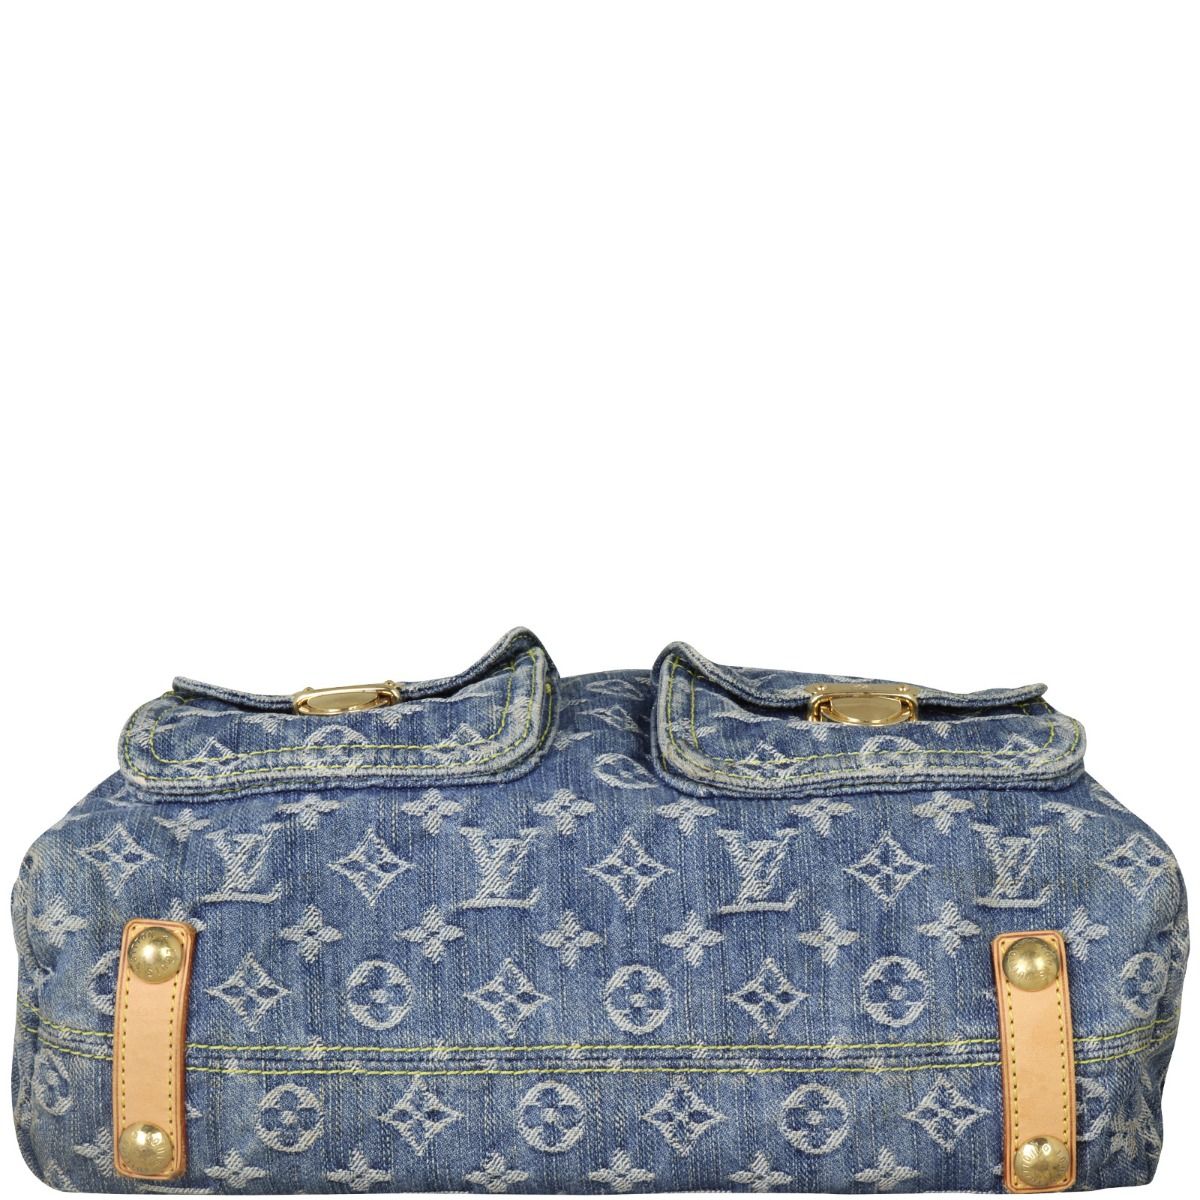 The Louis Vuitton denim Baggy is currently my FAVE summer bag